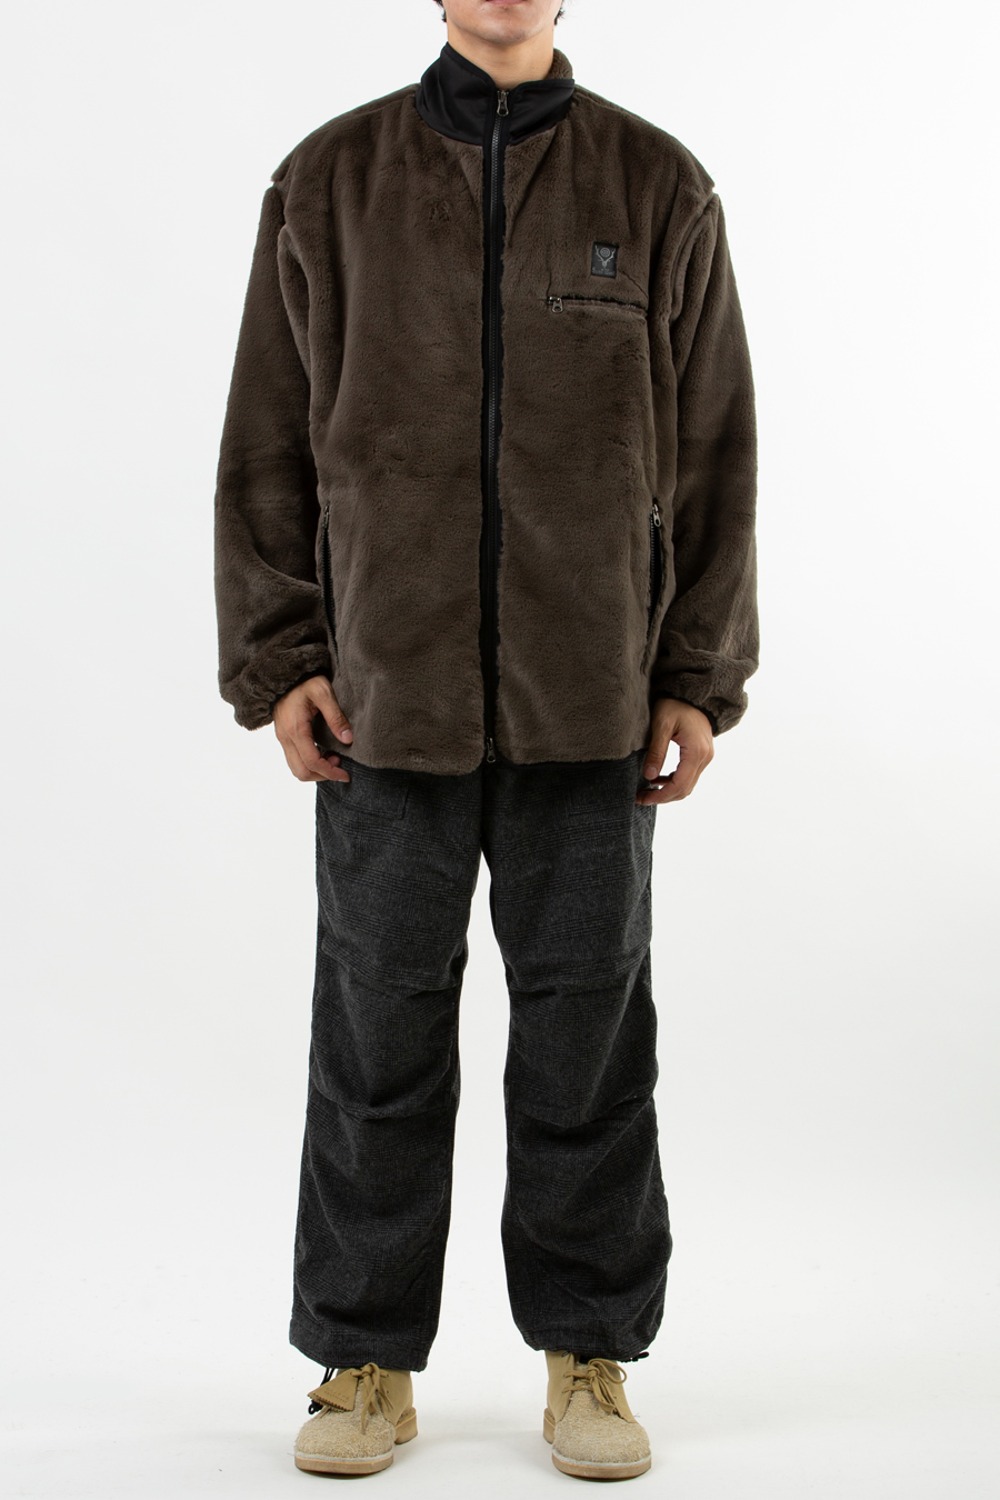 SOUTH2 WEST8 PIPING JACKET - MICRO FUR CHARCOAL